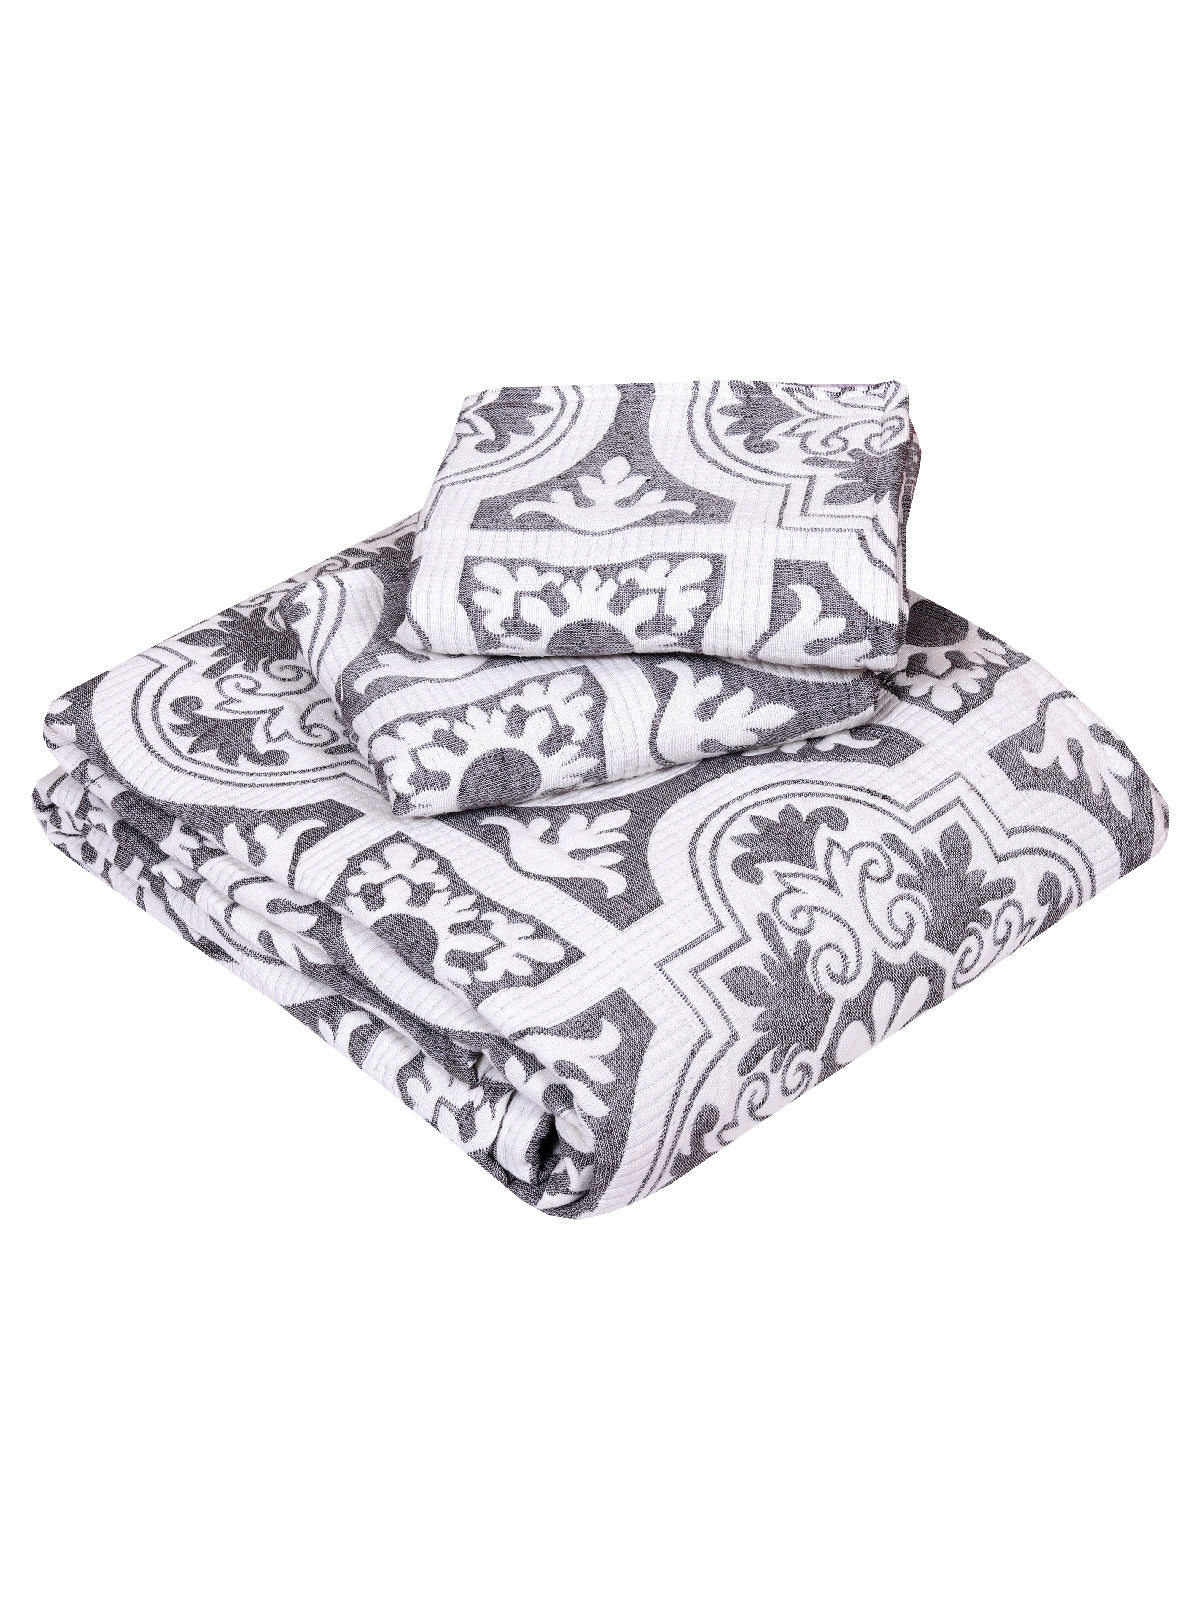 Grey & Off White Ethnic Motifs Patterned Reversible Double Bed Cover With 2 Pillow Covers